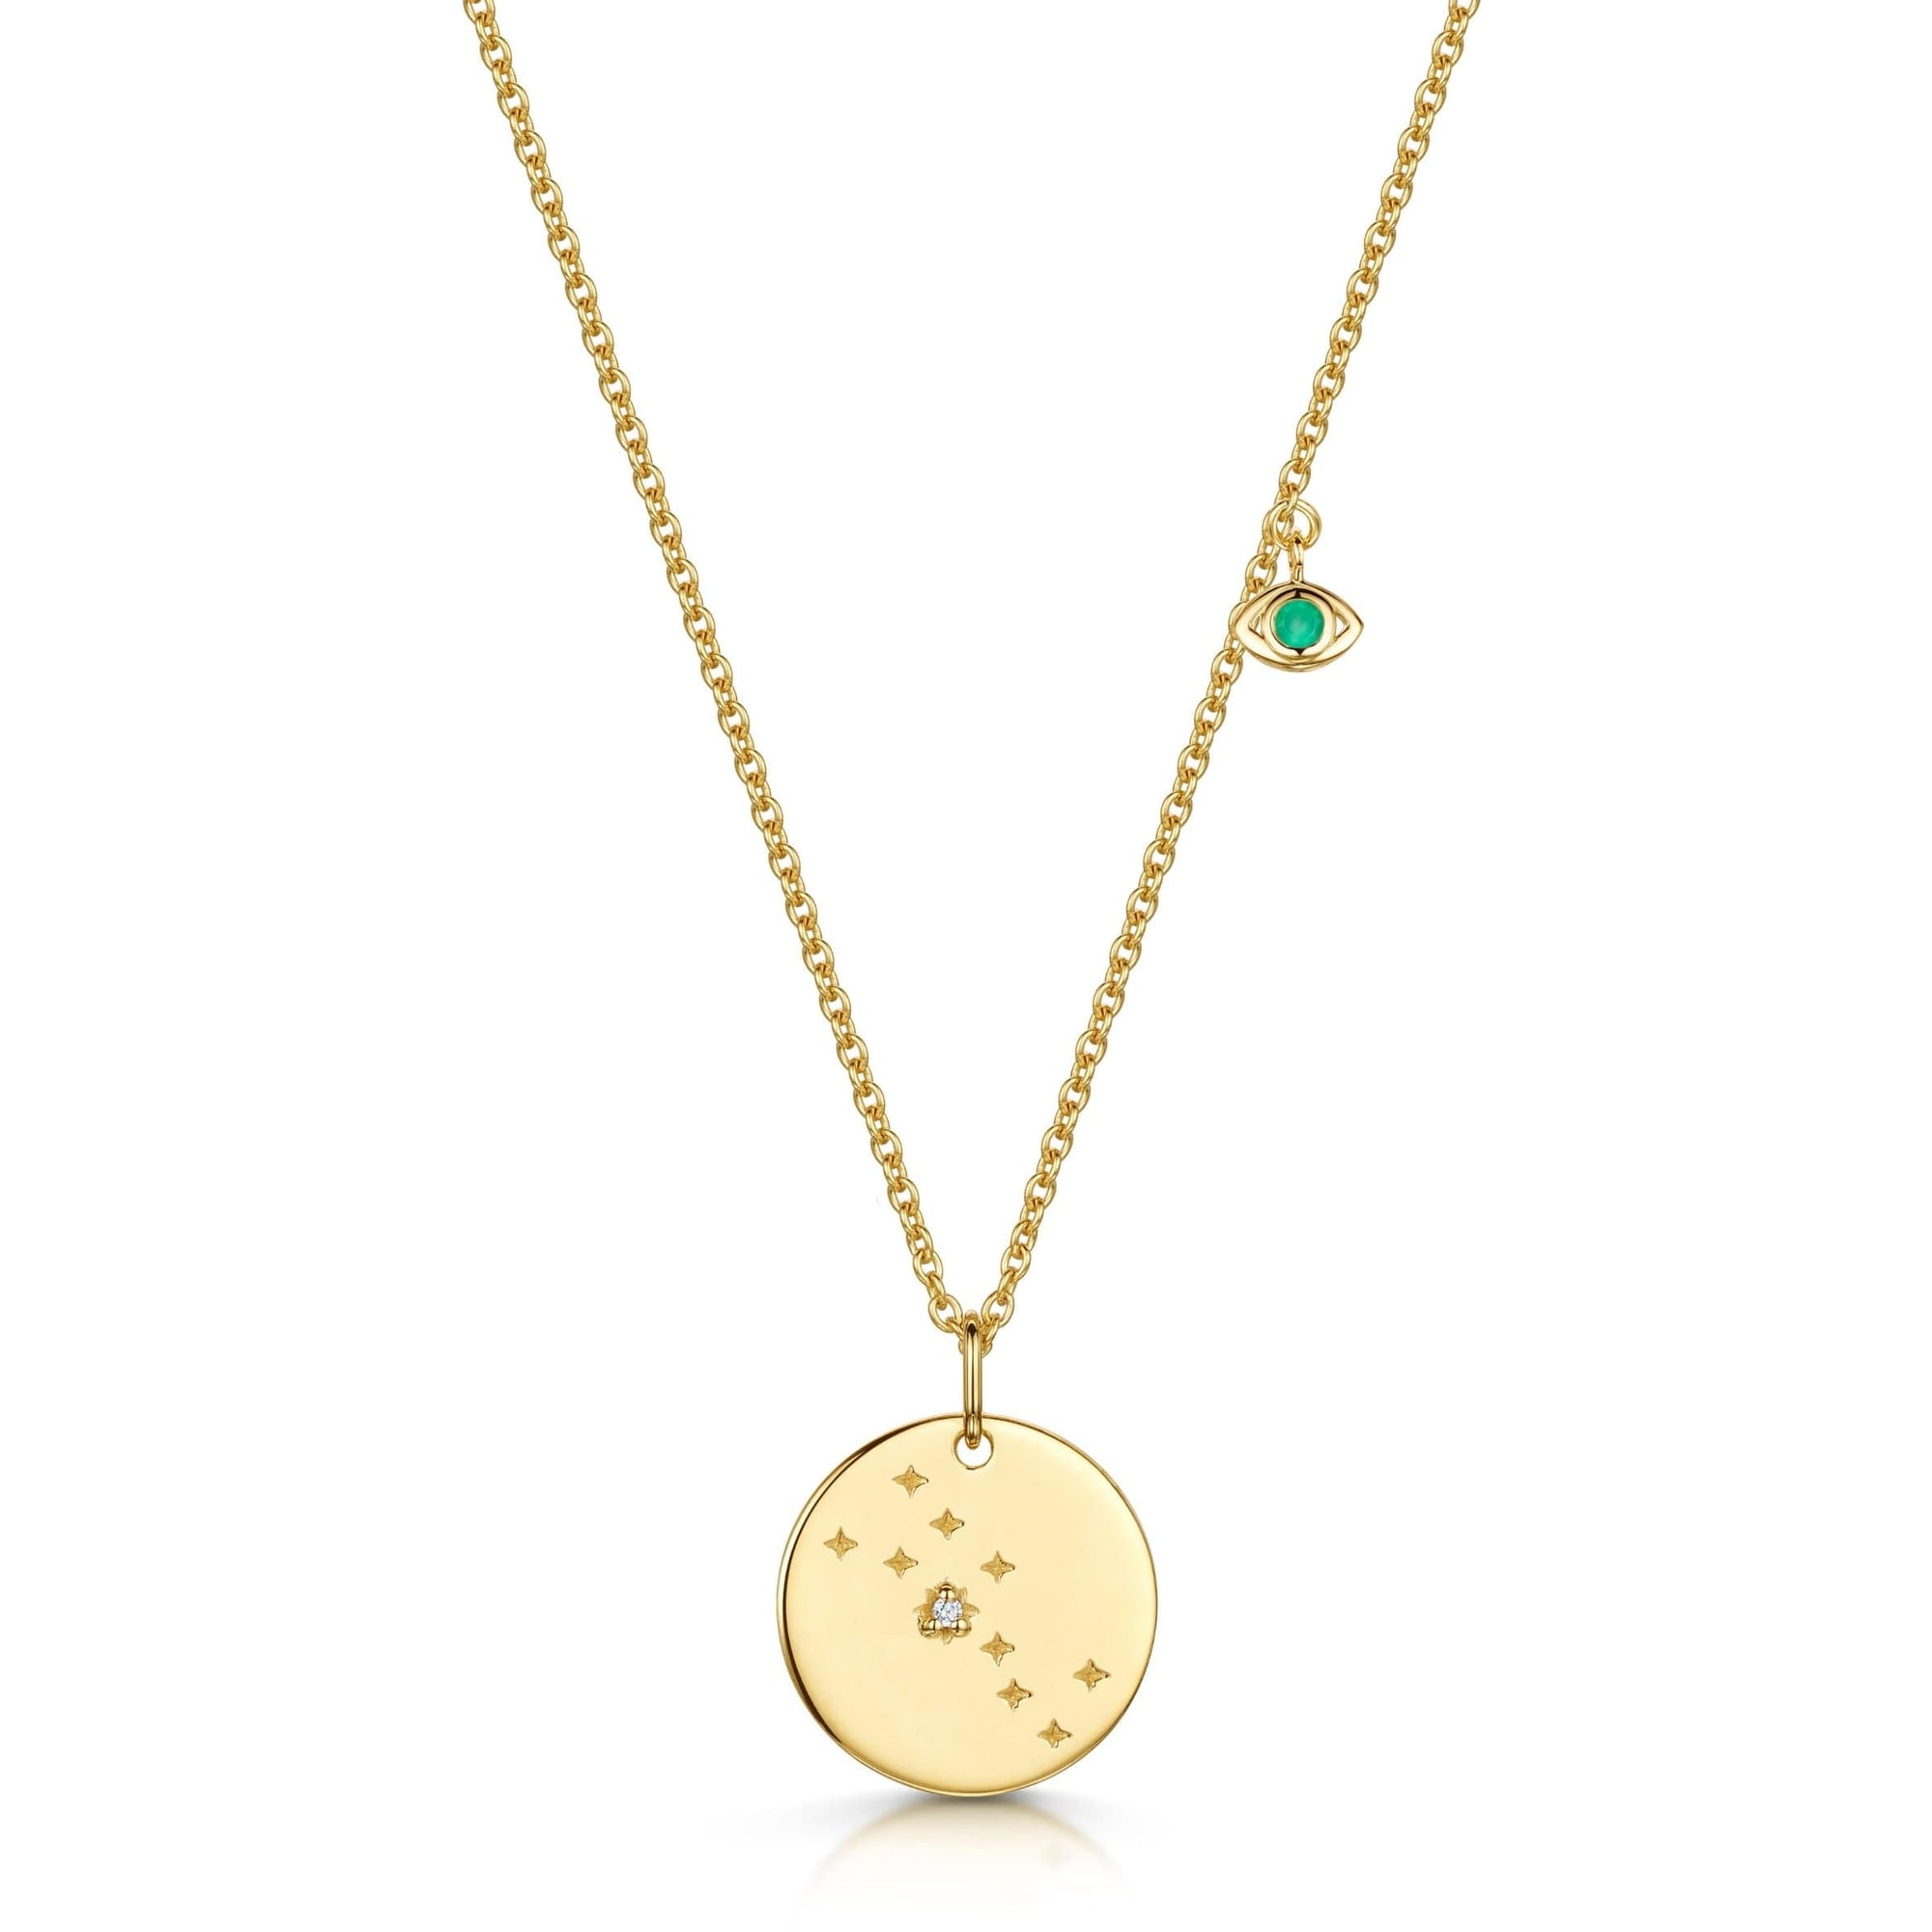 Fervor Montreal Necklace Taurus Double-Sided Zodiac & Constellation Necklace